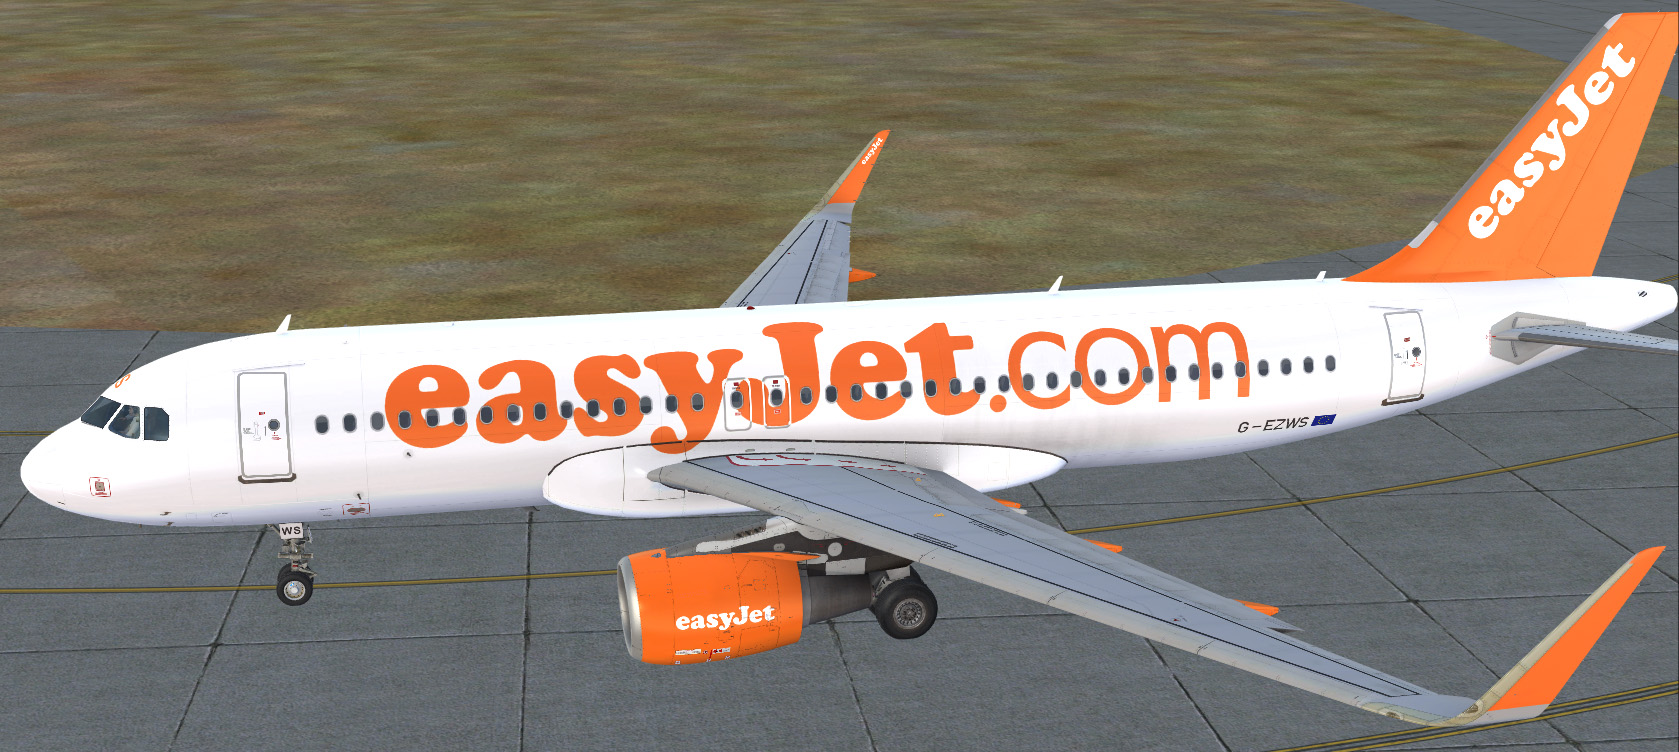 More information about "easyJet A320-214 Sharklets G-EZWS"